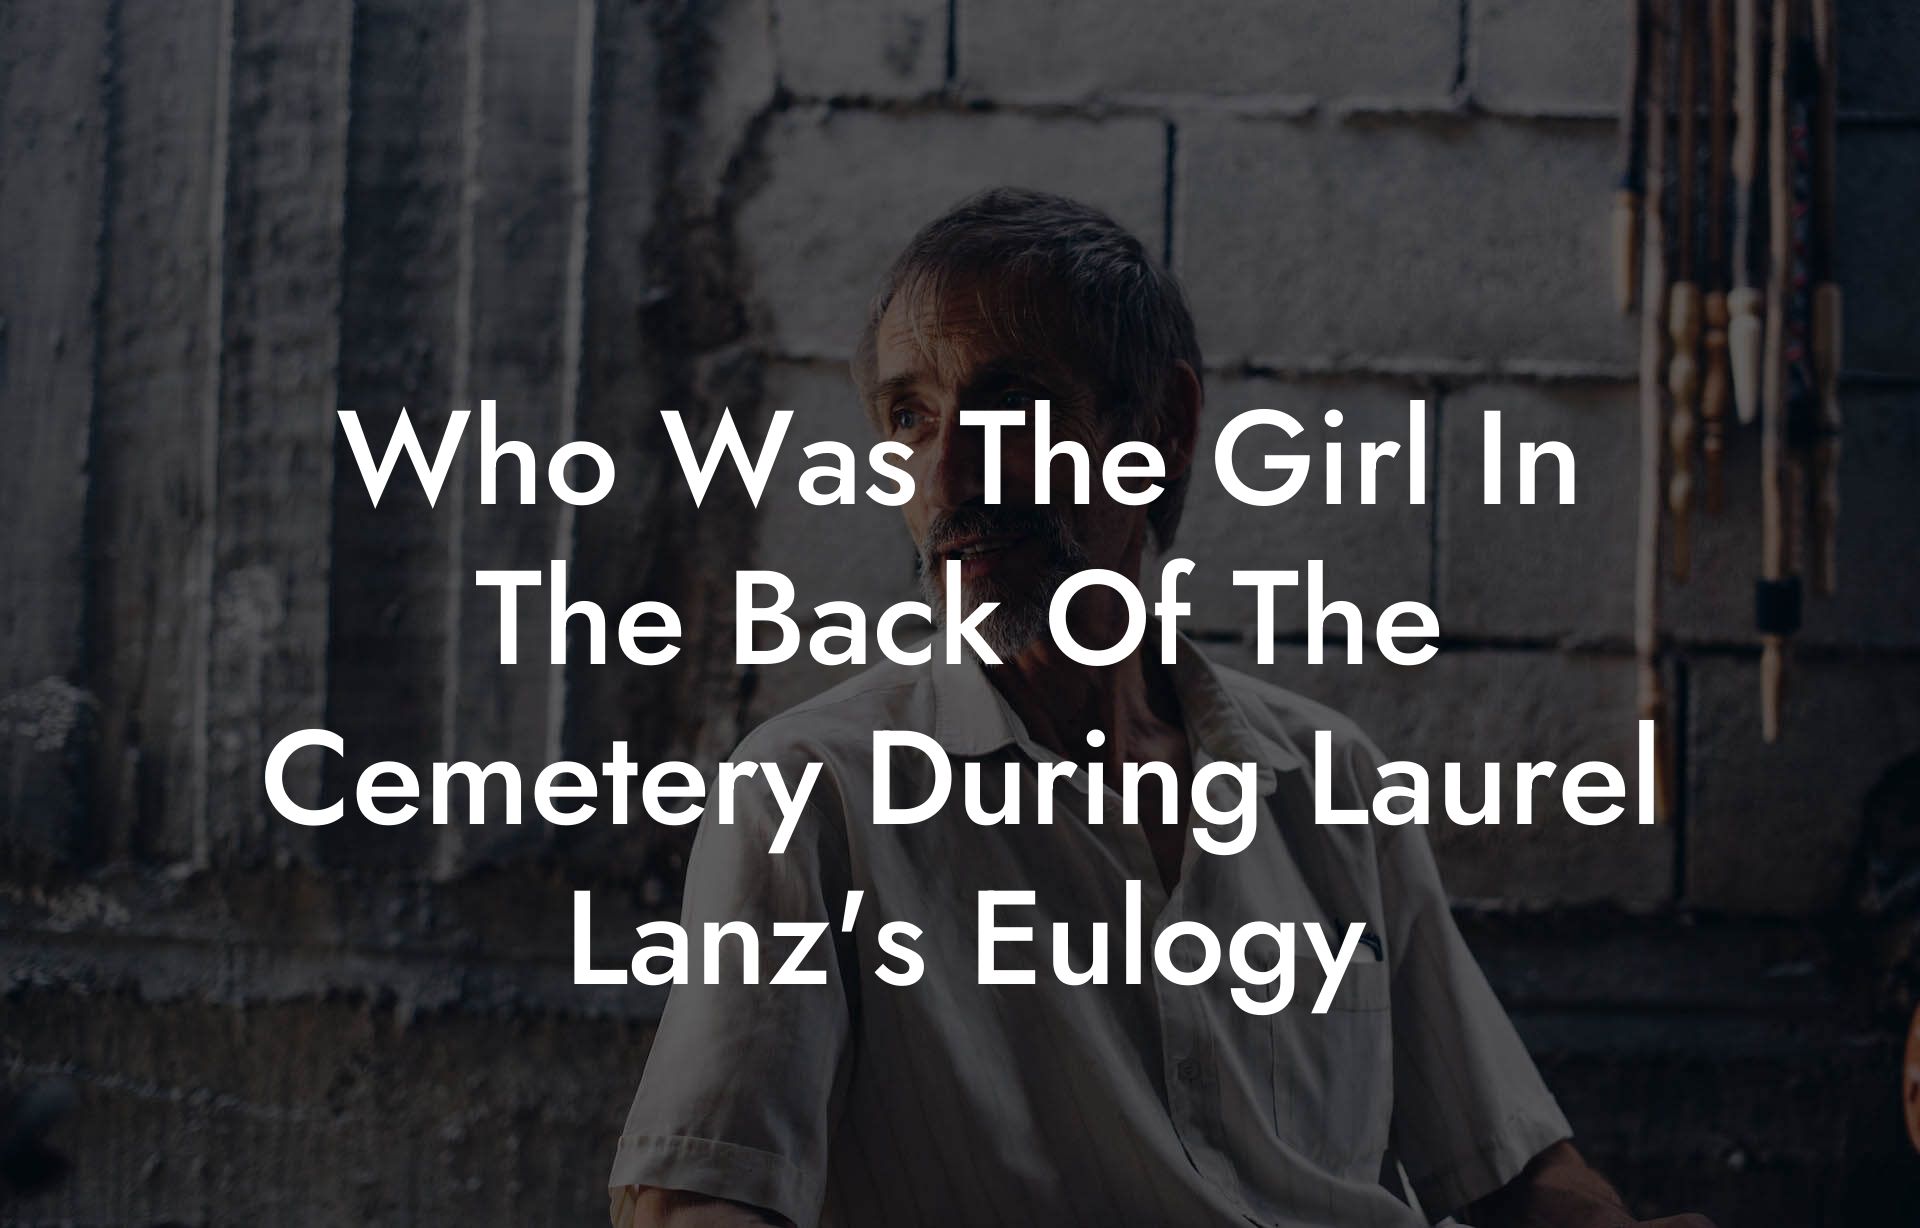 Who Was The Girl In The Back Of The Cemetery During Laurel Lanz's Eulogy